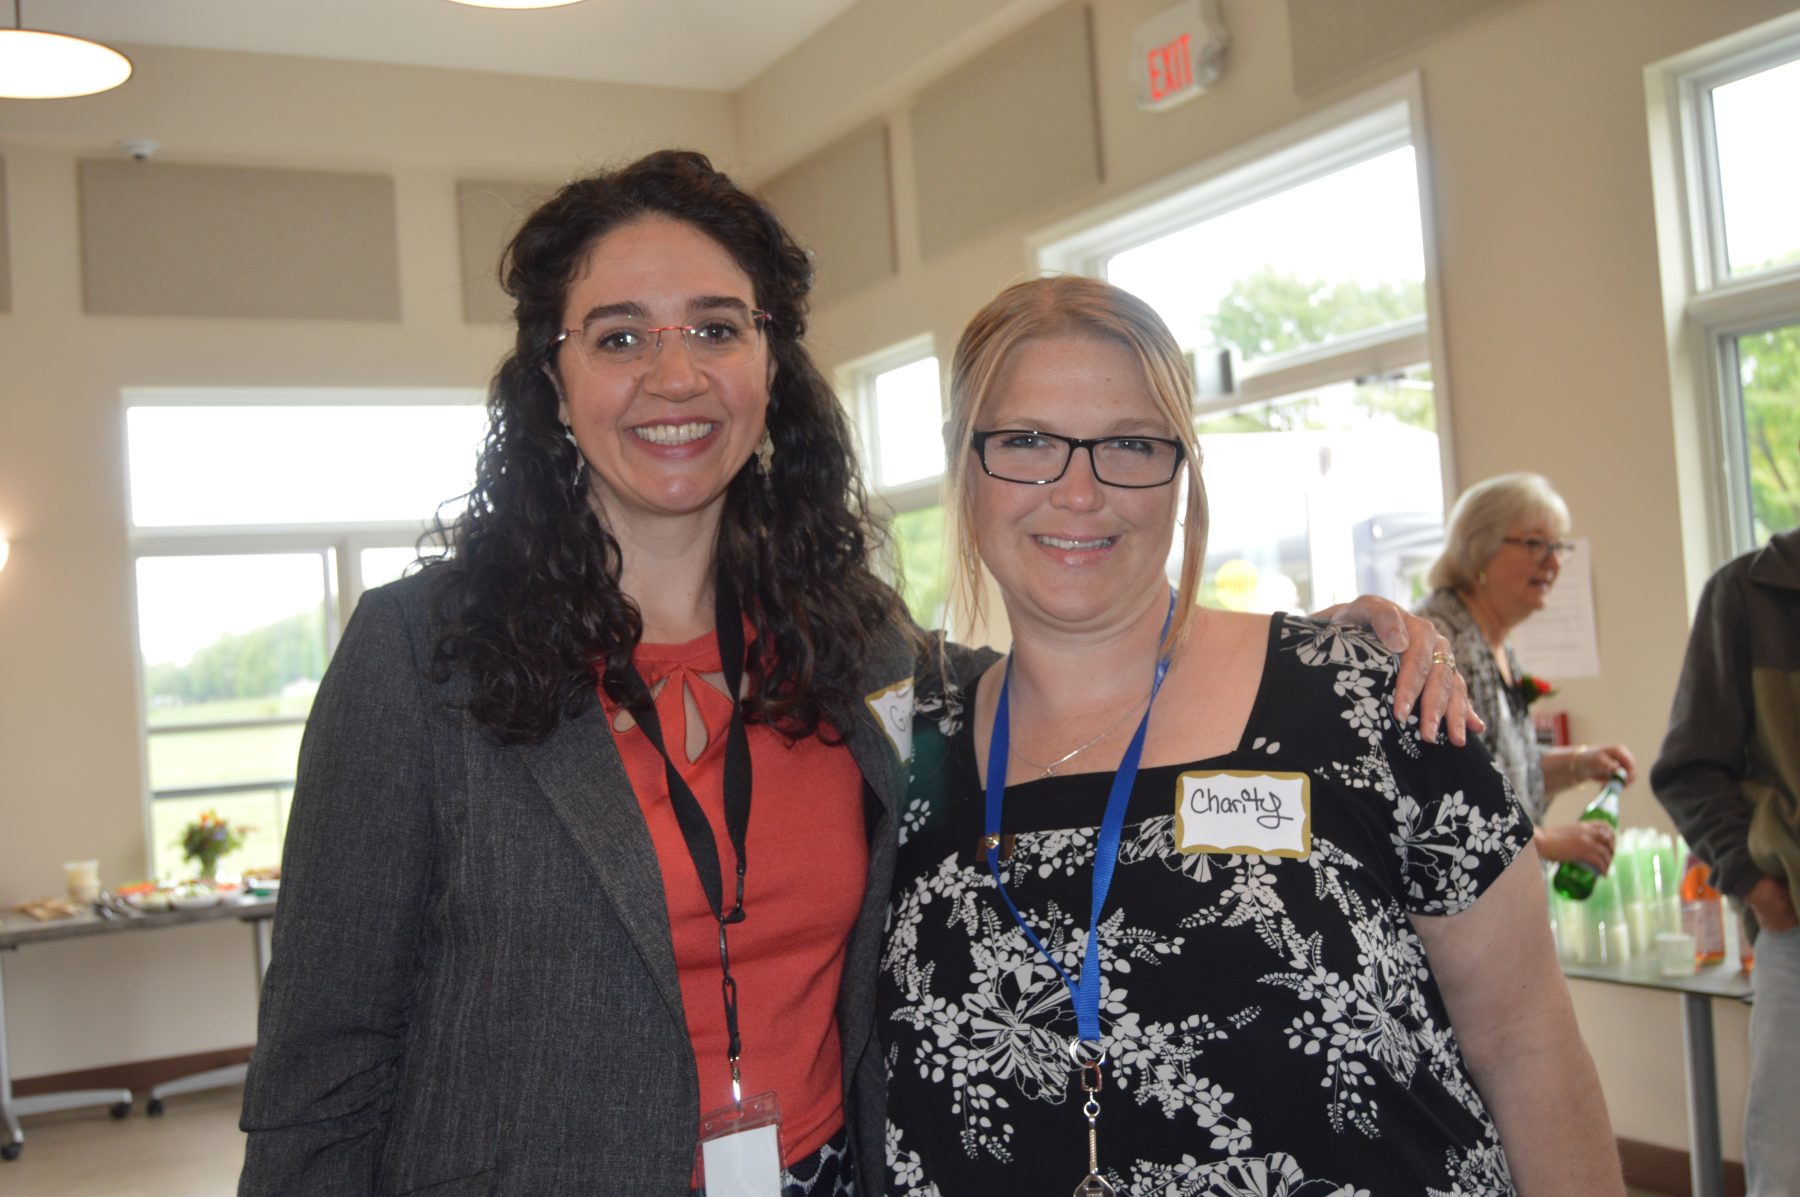 Gina Govoni, Executive Director of the Franklin County Regional Housing & Redevelopment Authority (HRA) and Rural Development, Inc. (left), with Charity Day, Associate Director of Client Services at LifePath (right).